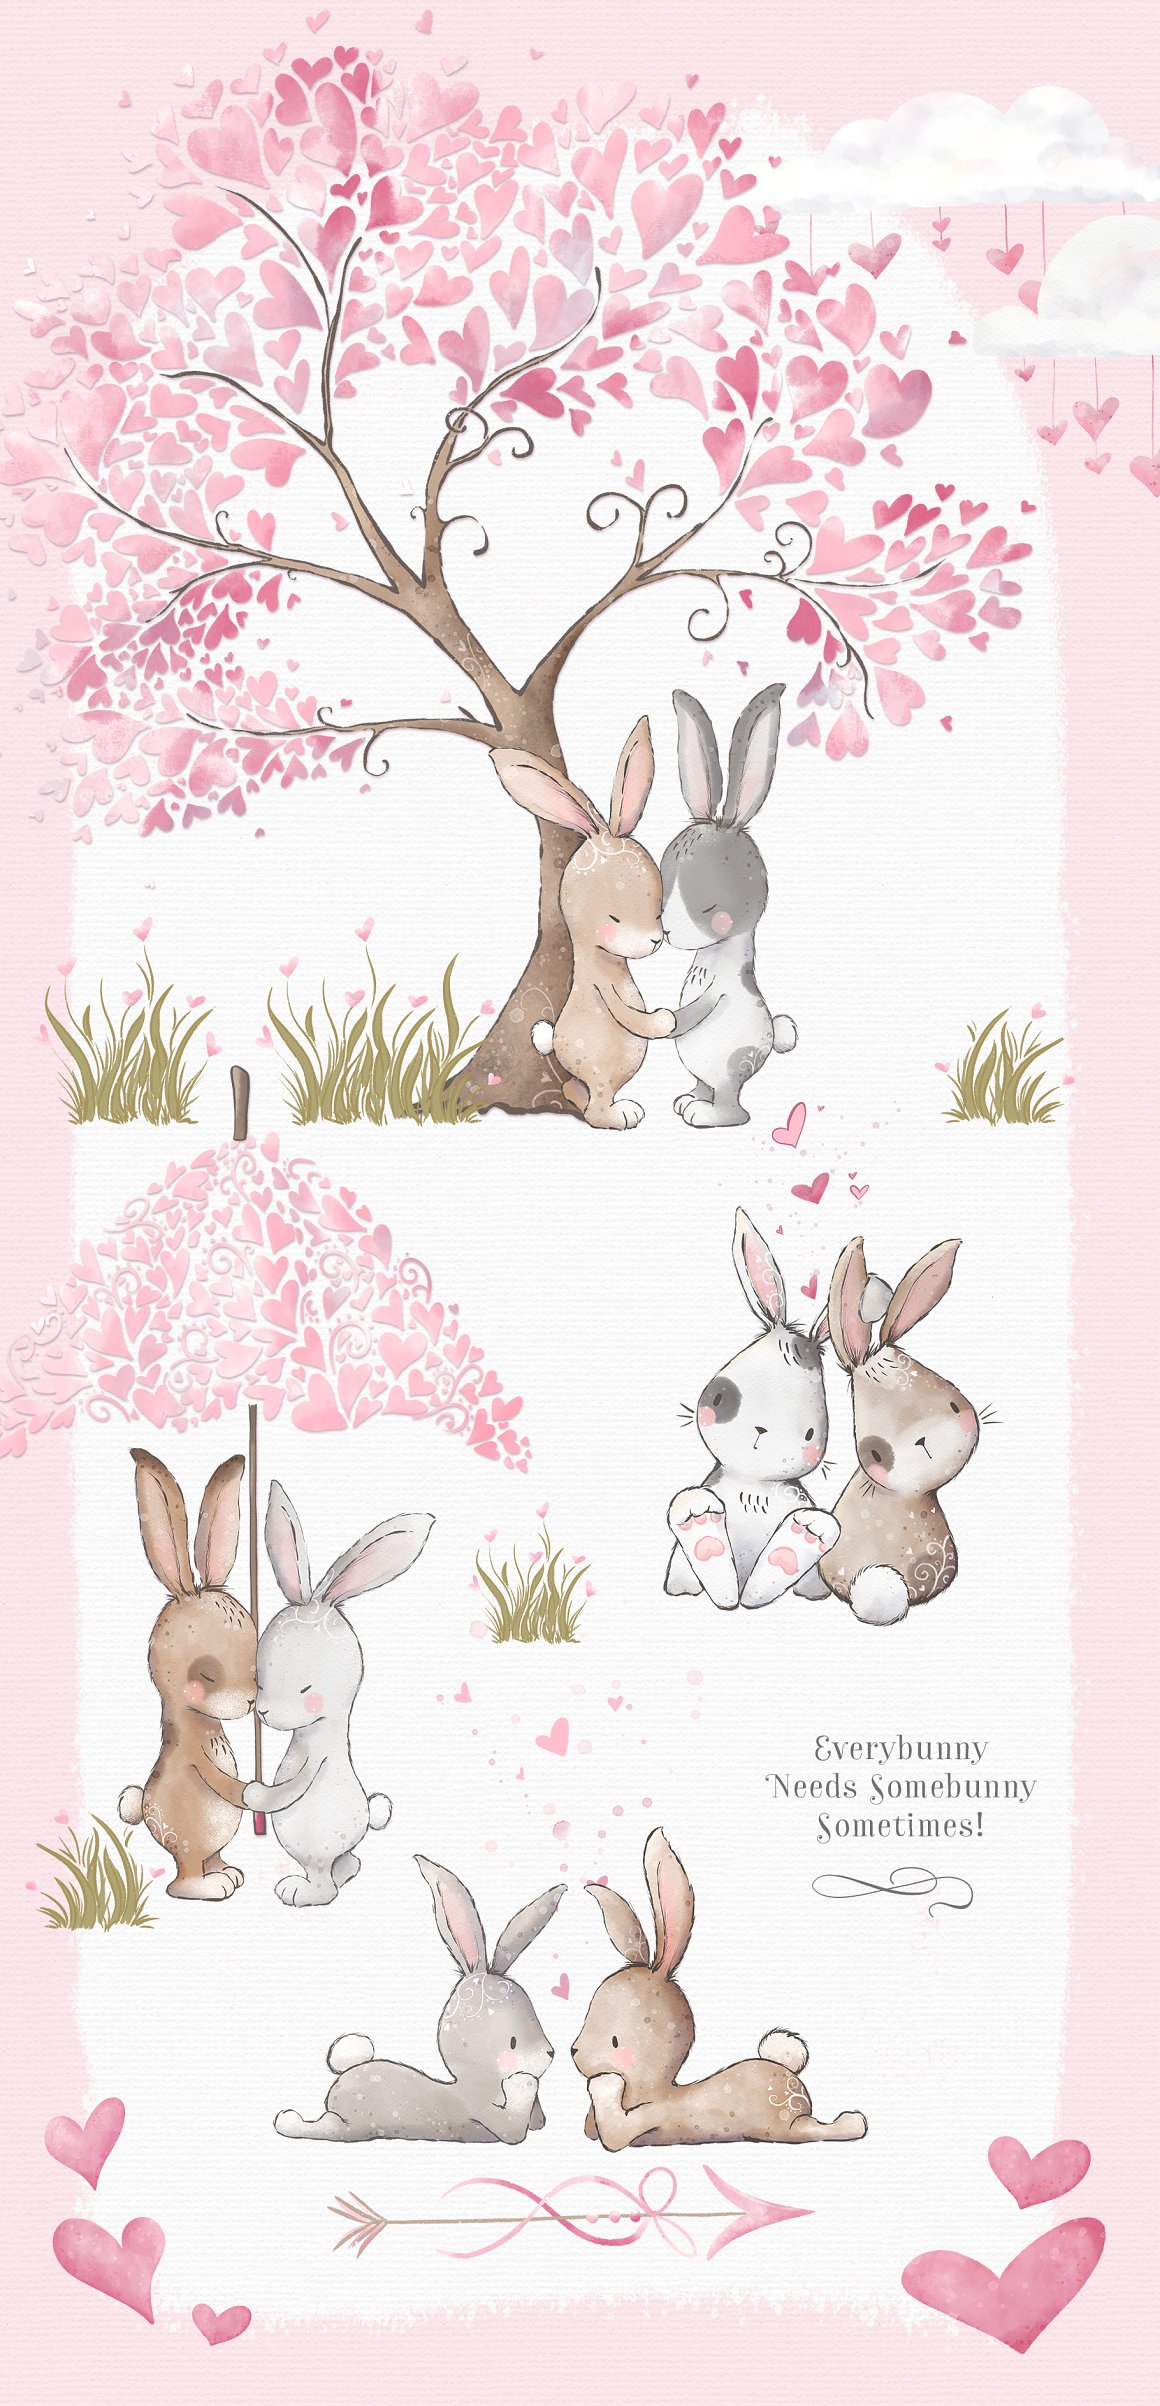 A set of 4 different illustrations of a bunny and tree of pink hearts on a pink background.